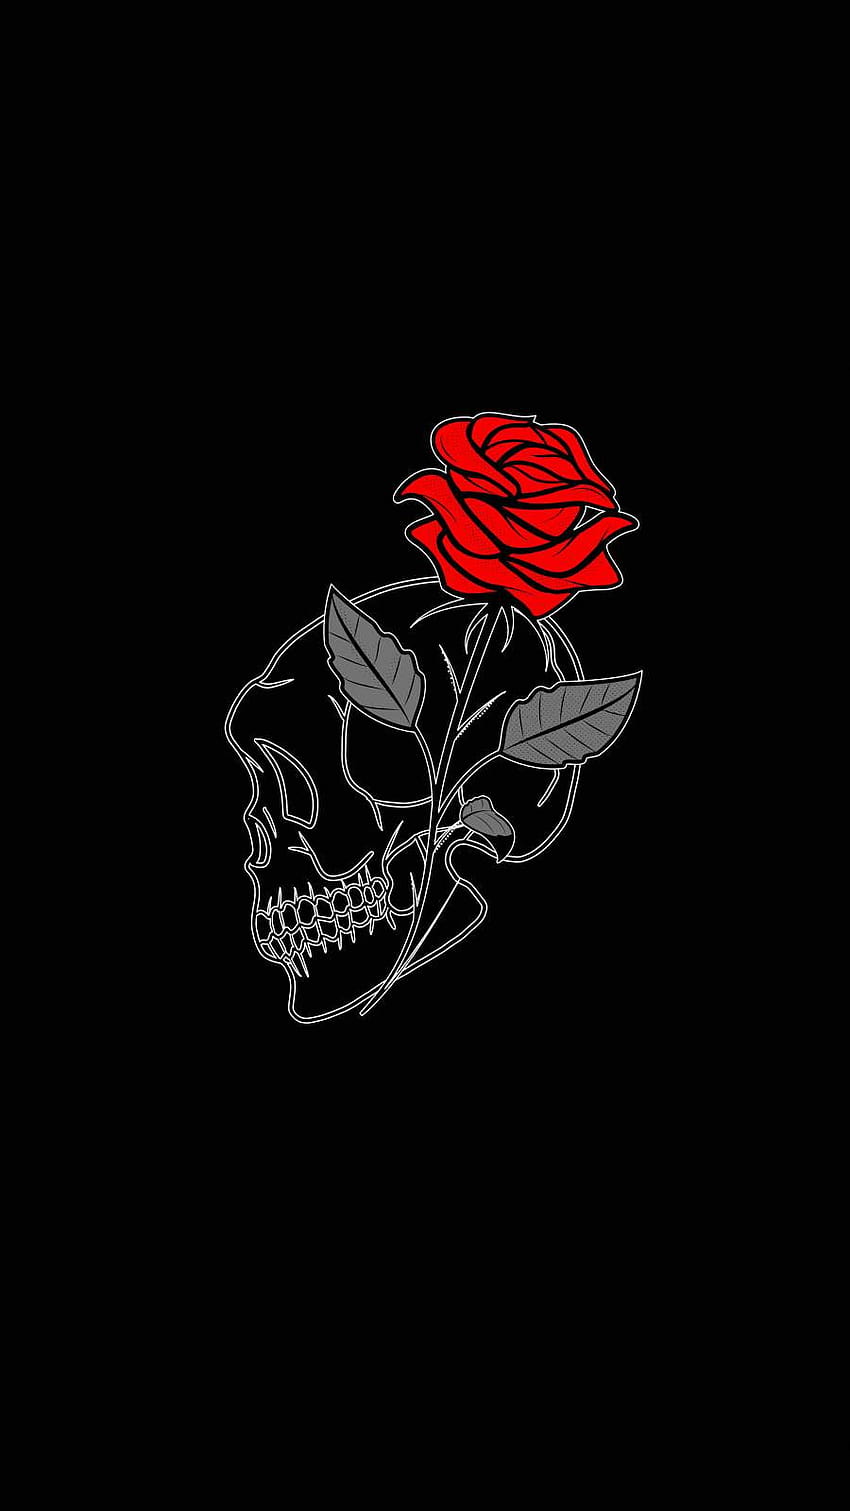 A human skulls with roses on white background Vector Image